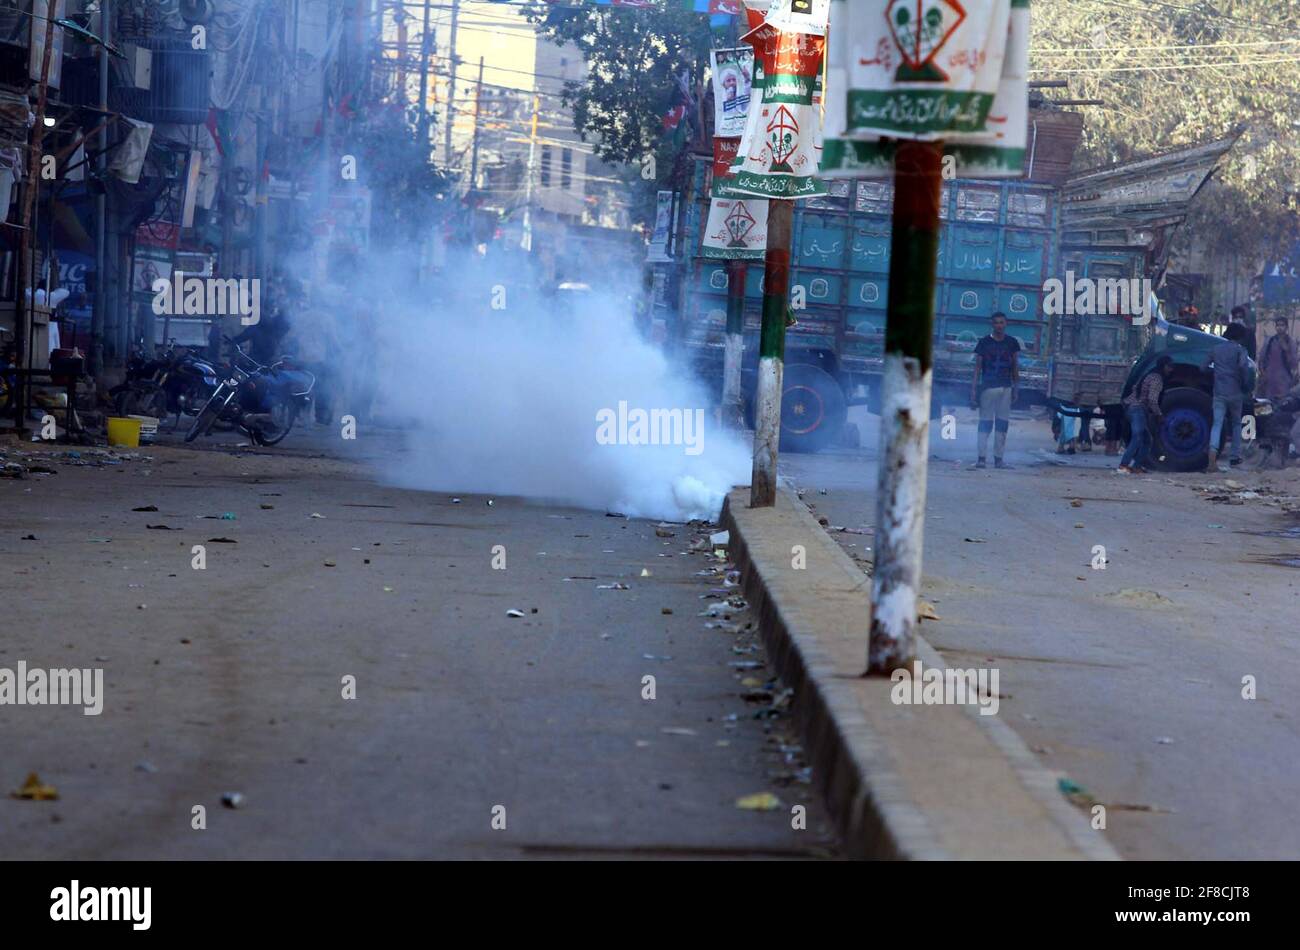 Police officials restore baton charge and fired tear gas shells to repel protesters during protest demonstration of Tehreek-e-Labbaik (TLP) against arrested of Saad Hussain Rizvi, Chief of Tehreek-e-Labbaik Pakistan (TLP) son of late cleric Khadim Hussain Rizvi, Baldia Town in Karachi on Tuesday, April 13, 2021. Stock Photo